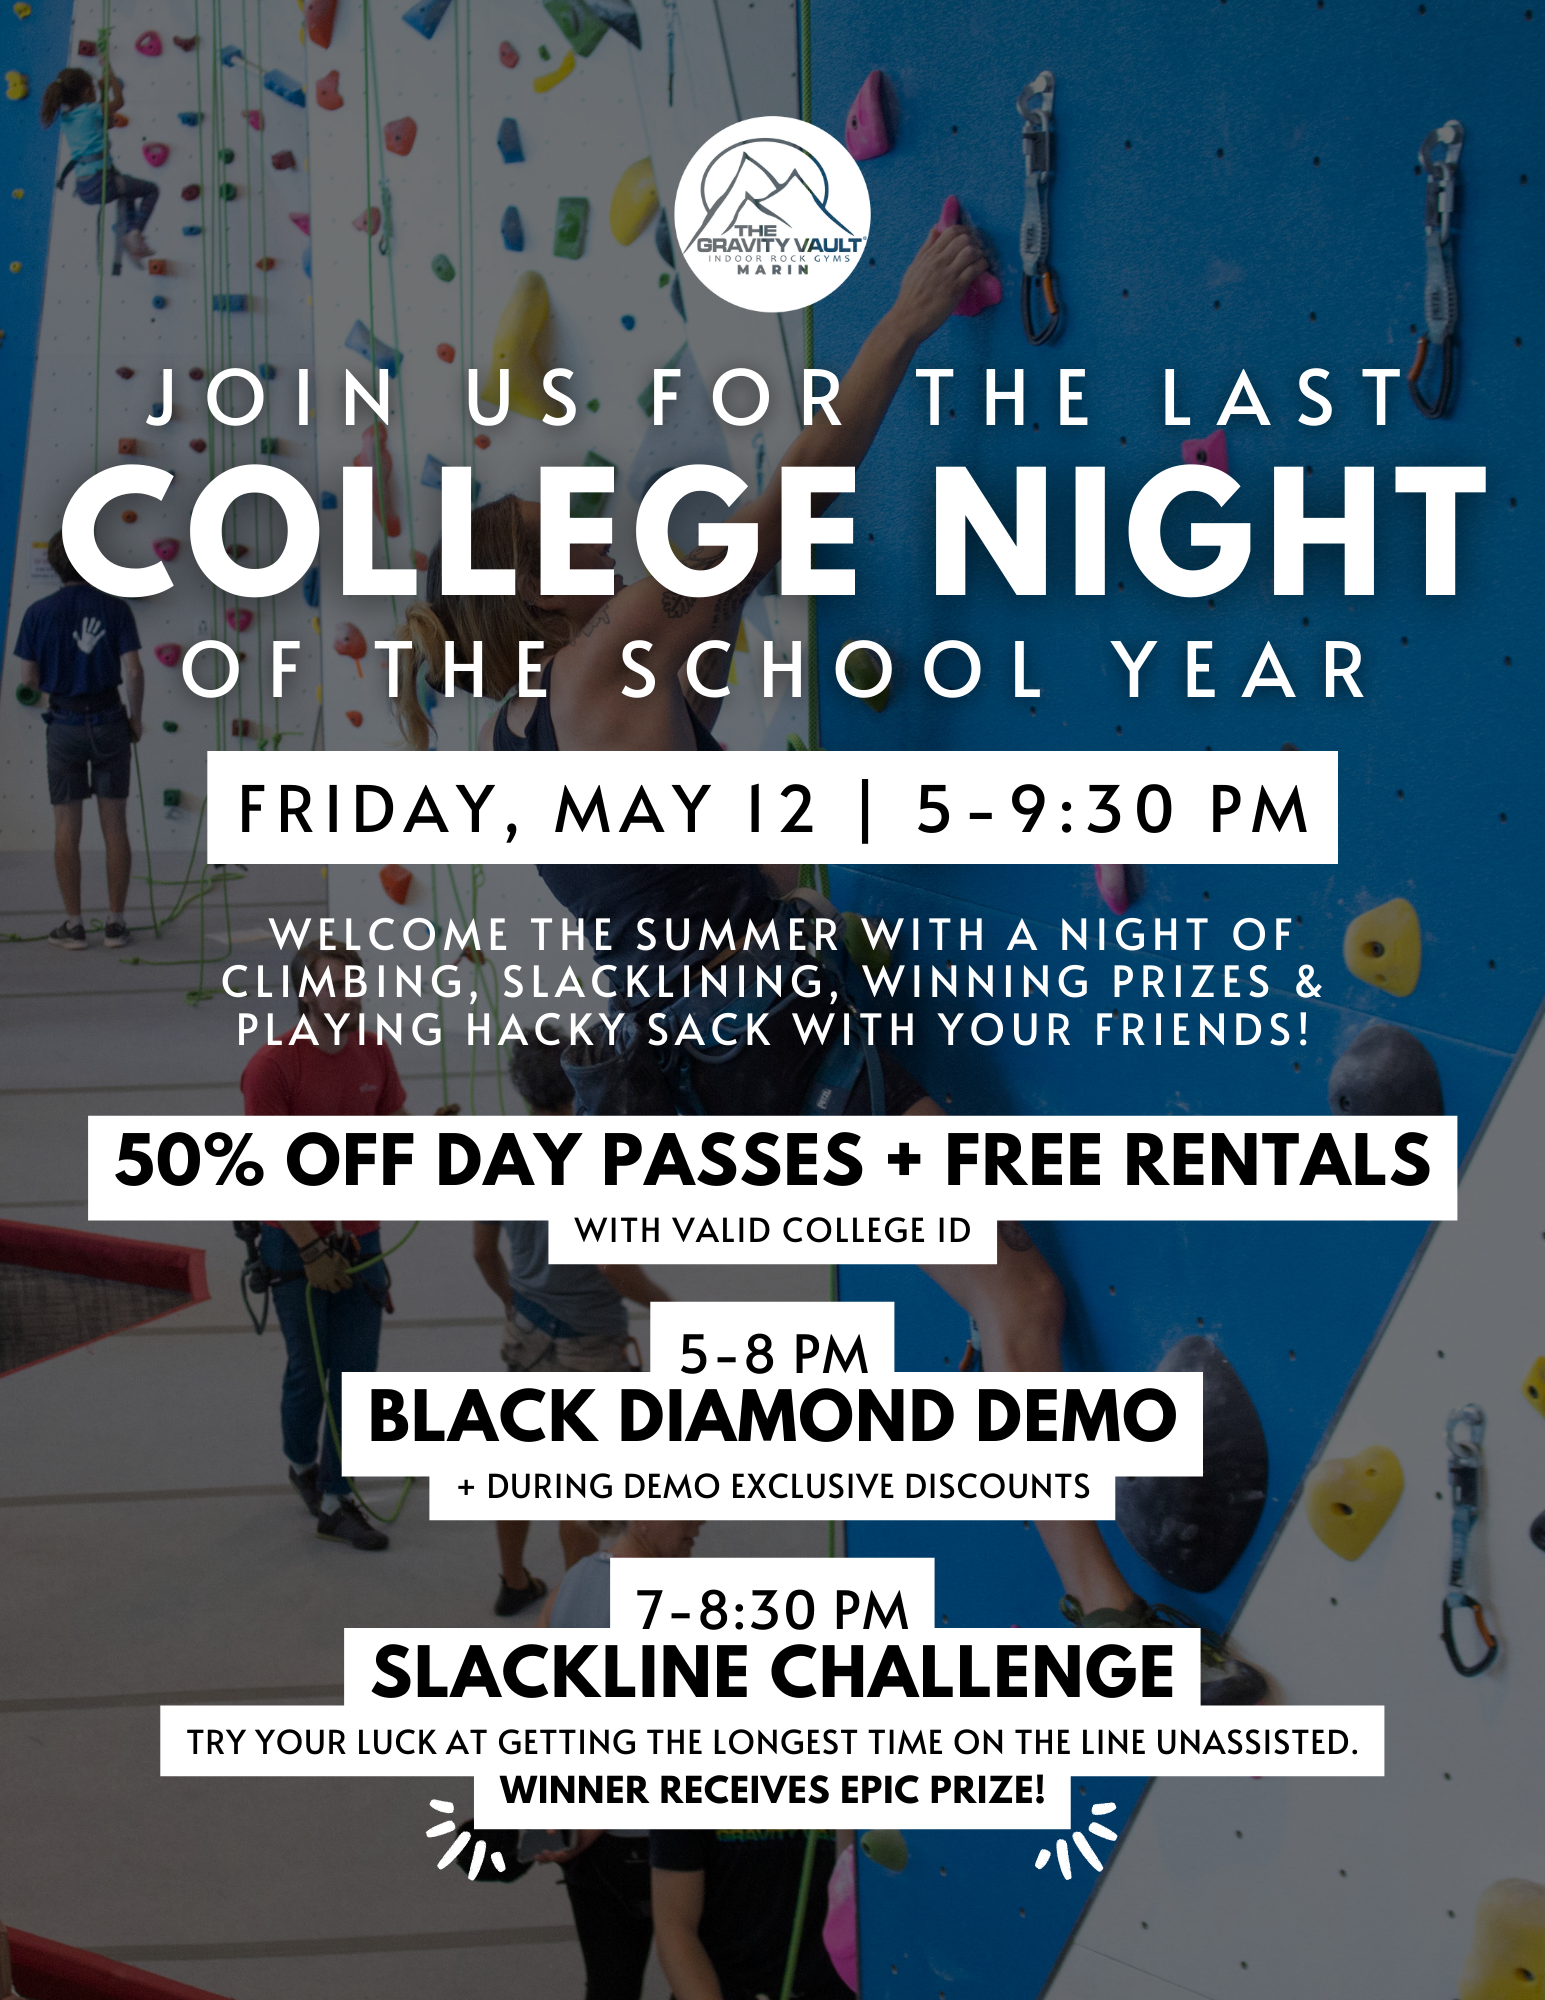 Friday, May 12th, 5-9:30 pm show your current College Student ID (or a current class schedule) and get 50% OFF A DAY PASS + FREE RENTALS!  There will be a Black Diamond Demo from 5-8 pm (exclusive discounts on orders placed at the demo) and a Slackline Challenge from 7-8:30 pm where the winner receives an epic prize!   ✋🏼 BEFORE THE EVENT: - Be sure to fill out a waiver to save you time the day of. If you are UNDER 18 you MUST HAVE YOUR LEGAL GUARDIAN FILL OUT A WAIVER FOR YOU: https://gravityvault.com/locations/marin-county-ca/waivers - Please allow for some time prior to the event for mandatory gym orientation, so that you can become familiar with our facility, climbing safety measures, and what is available to you during the event. - If you are new to our gym and certified to belay elsewhere, you will need to take a top rope belay test.  (50% off discount only valid for 05/12 from 5-9:30 pm.)